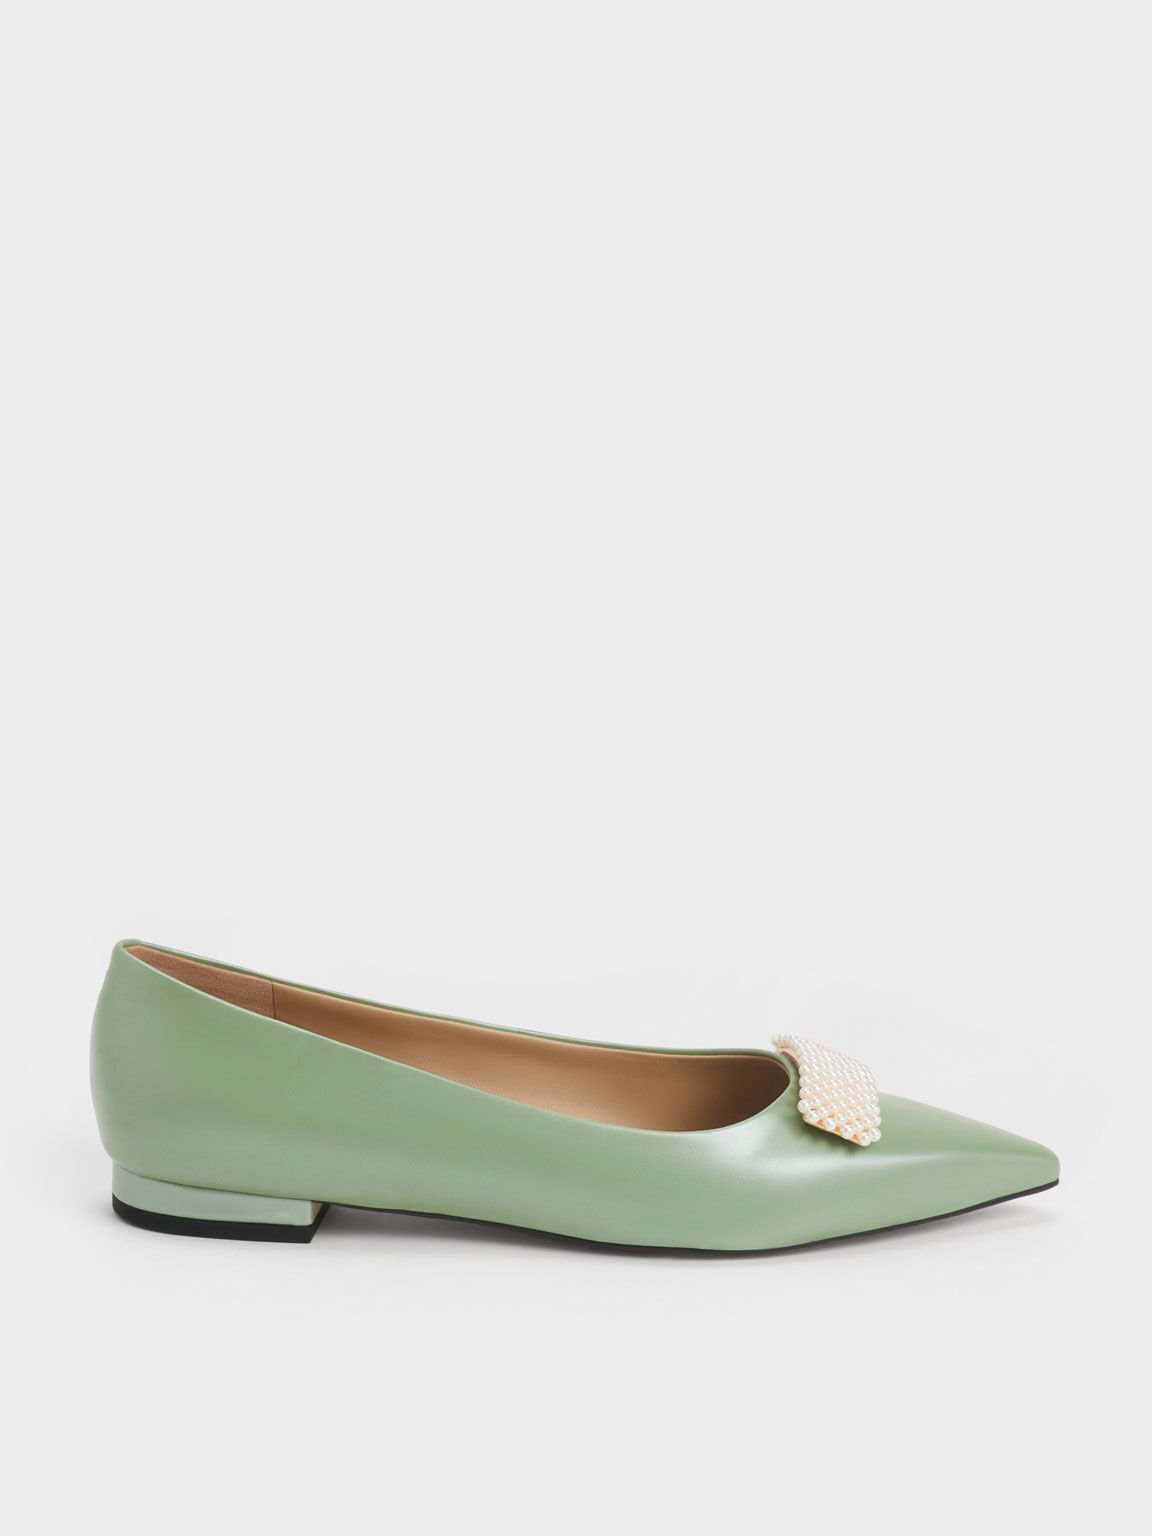 Leather Pointed-Toe Beaded Ballerinas, Green, hi-res